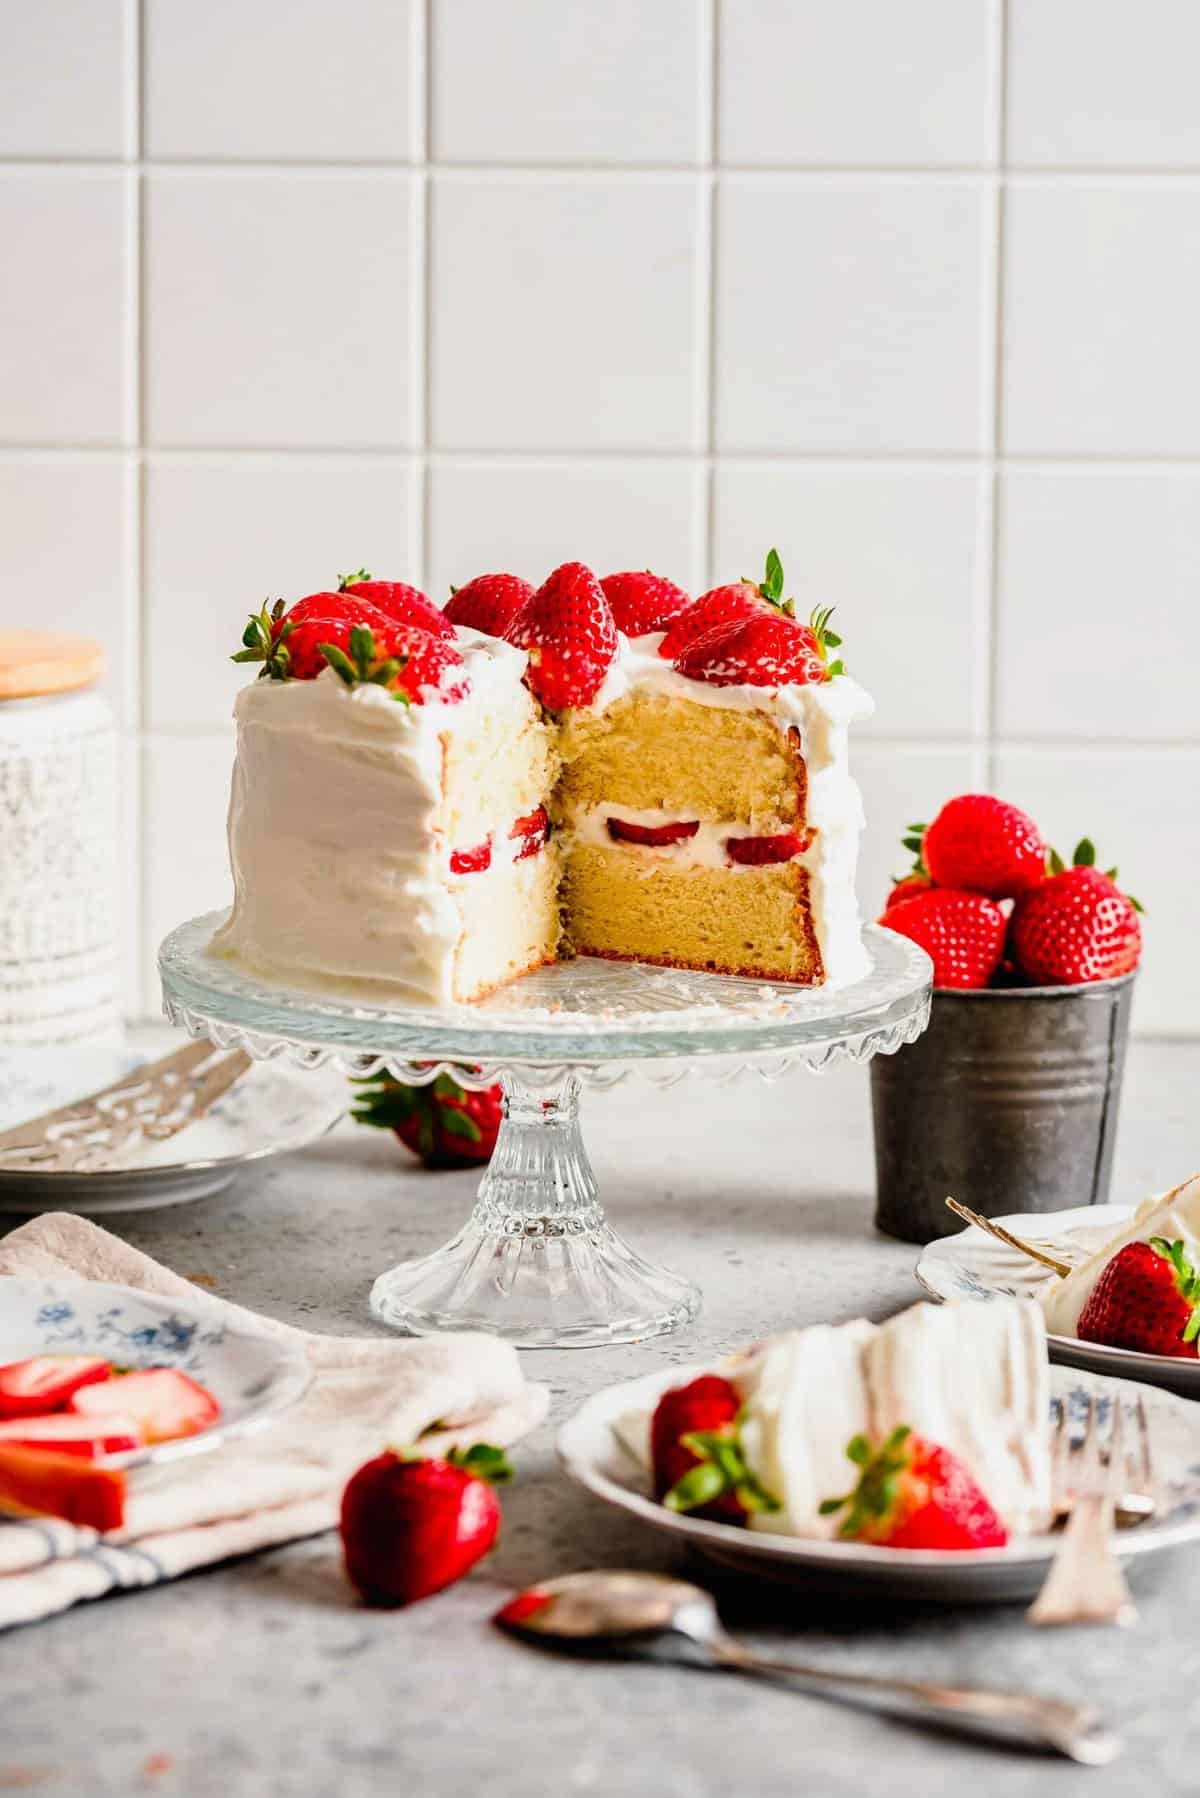 Strawberry sponge cake on cake stand with slices removed to show inside